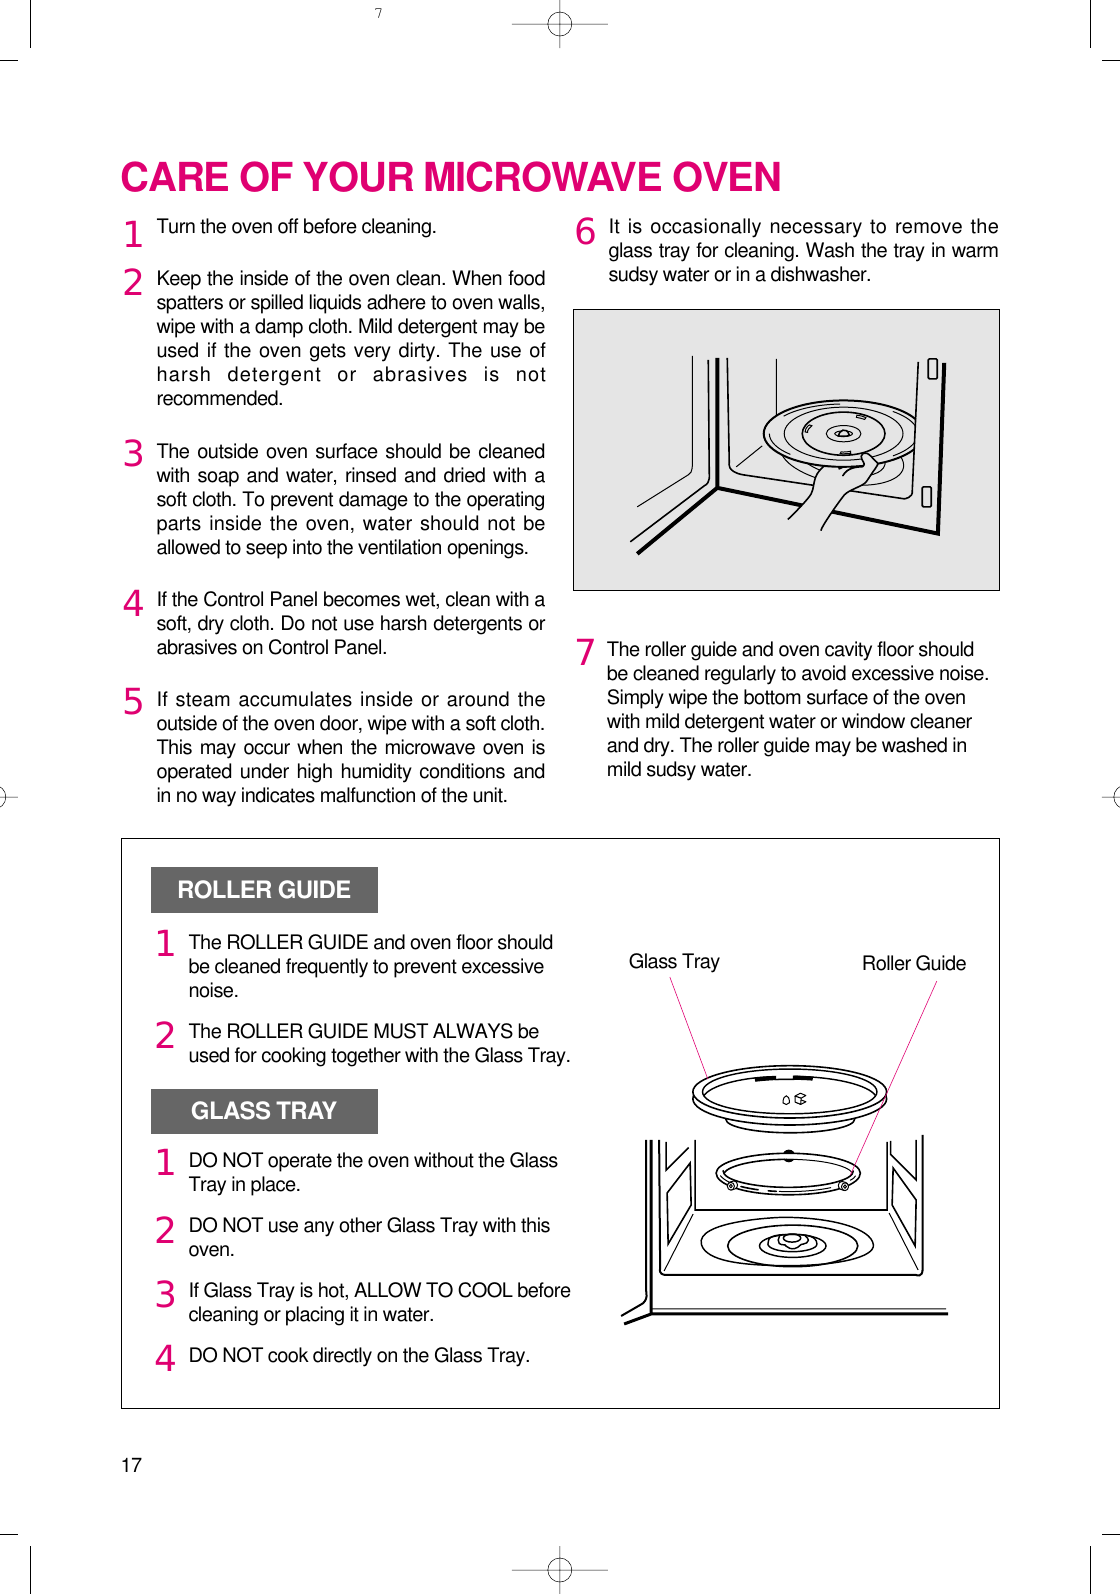 17CARE OF YOUR MICROWAVE OVENTurn the oven off before cleaning.Keep the inside of the oven clean. When foodspatters or spilled liquids adhere to oven walls,wipe with a damp cloth. Mild detergent may beused if the oven gets very dirty. The use ofharsh detergent or abrasives is notrecommended.The outside oven surface should be cleanedwith soap and water, rinsed and dried with asoft cloth. To prevent damage to the operatingparts inside the oven, water should not beallowed to seep into the ventilation openings.If the Control Panel becomes wet, clean with asoft, dry cloth. Do not use harsh detergents orabrasives on Control Panel.If steam accumulates inside or around theoutside of the oven door, wipe with a soft cloth.This may occur when the microwave oven isoperated under high humidity conditions andin no way indicates malfunction of the unit.It is occasionally necessary to remove theglass tray for cleaning. Wash the tray in warmsudsy water or in a dishwasher.1234567The roller guide and oven cavity floor shouldbe cleaned regularly to avoid excessive noise. Simply wipe the bottom surface of the ovenwith mild detergent water or window cleanerand dry. The roller guide may be washed inmild sudsy water.ROLLER GUIDEGLASS TRAYGlass Tray Roller GuideThe ROLLER GUIDE and oven floor shouldbe cleaned frequently to prevent excessivenoise.The ROLLER GUIDE MUST ALWAYS beused for cooking together with the Glass Tray.DO NOT operate the oven without the GlassTray in place.DO NOT use any other Glass Tray with thisoven.If Glass Tray is hot, ALLOW TO COOL beforecleaning or placing it in water.DO NOT cook directly on the Glass Tray.1212347